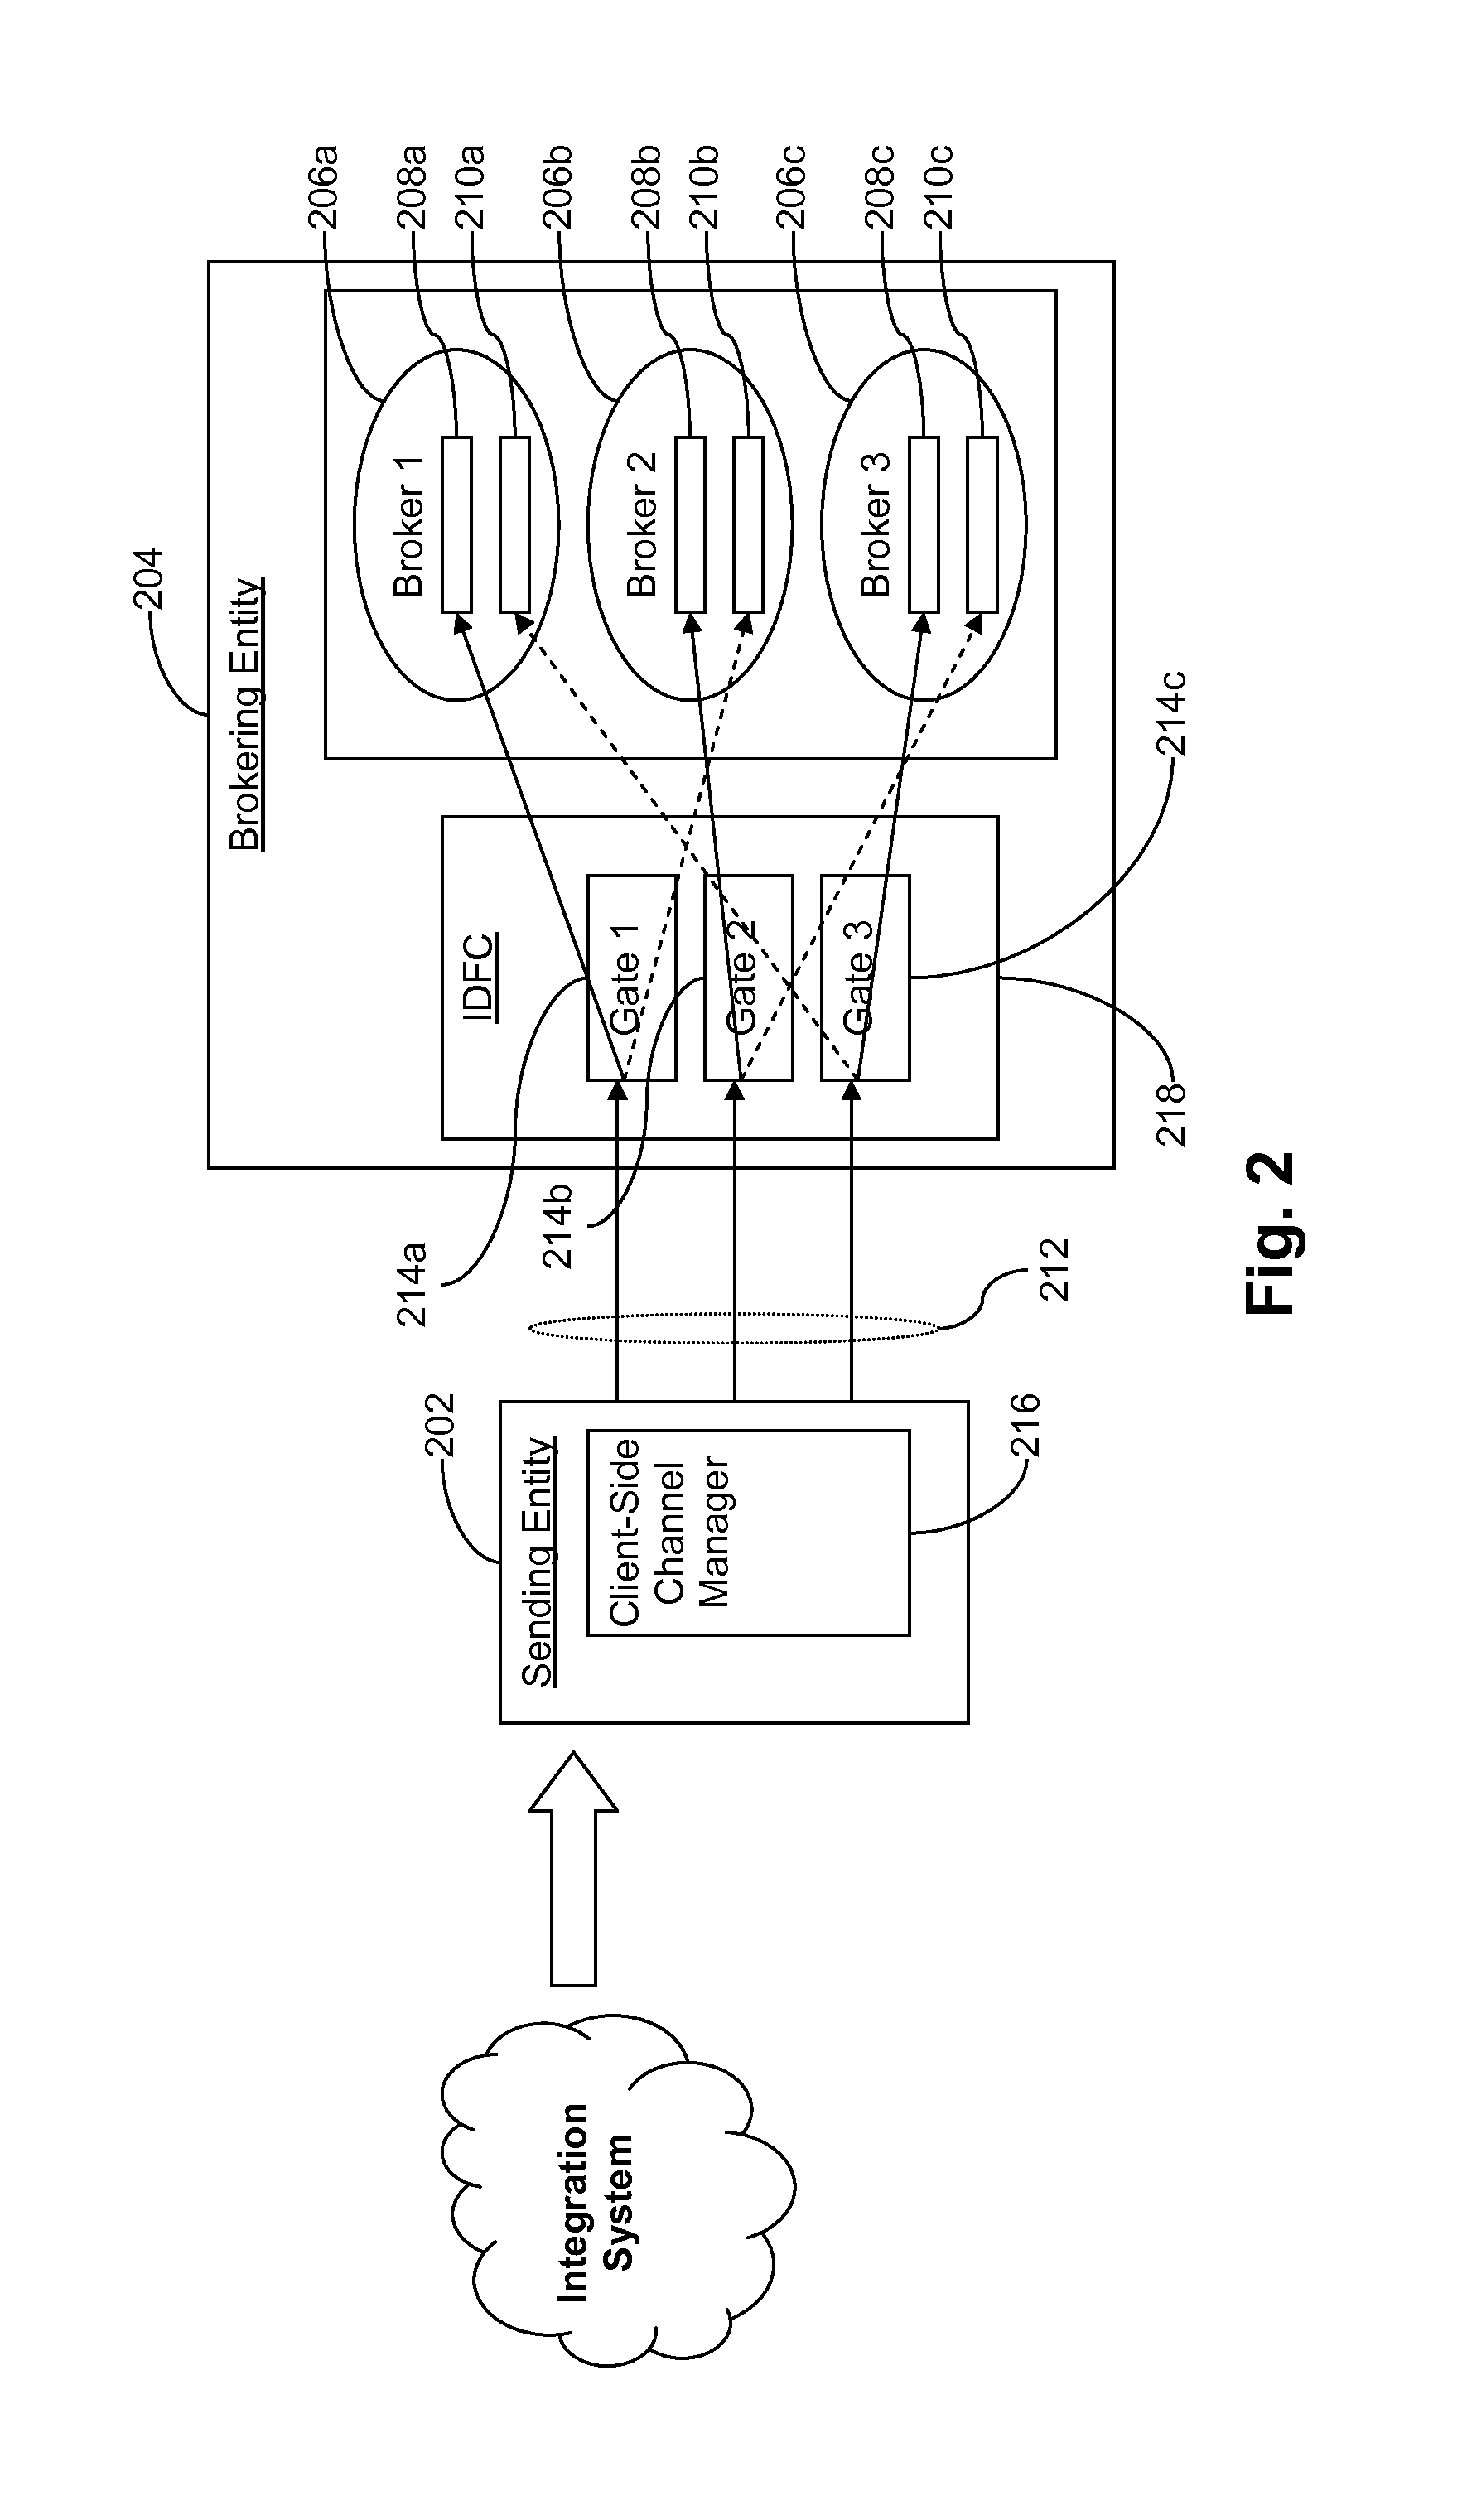 Systems and/or methods for automatically tuning a delivery system for transmission of large, volatile data